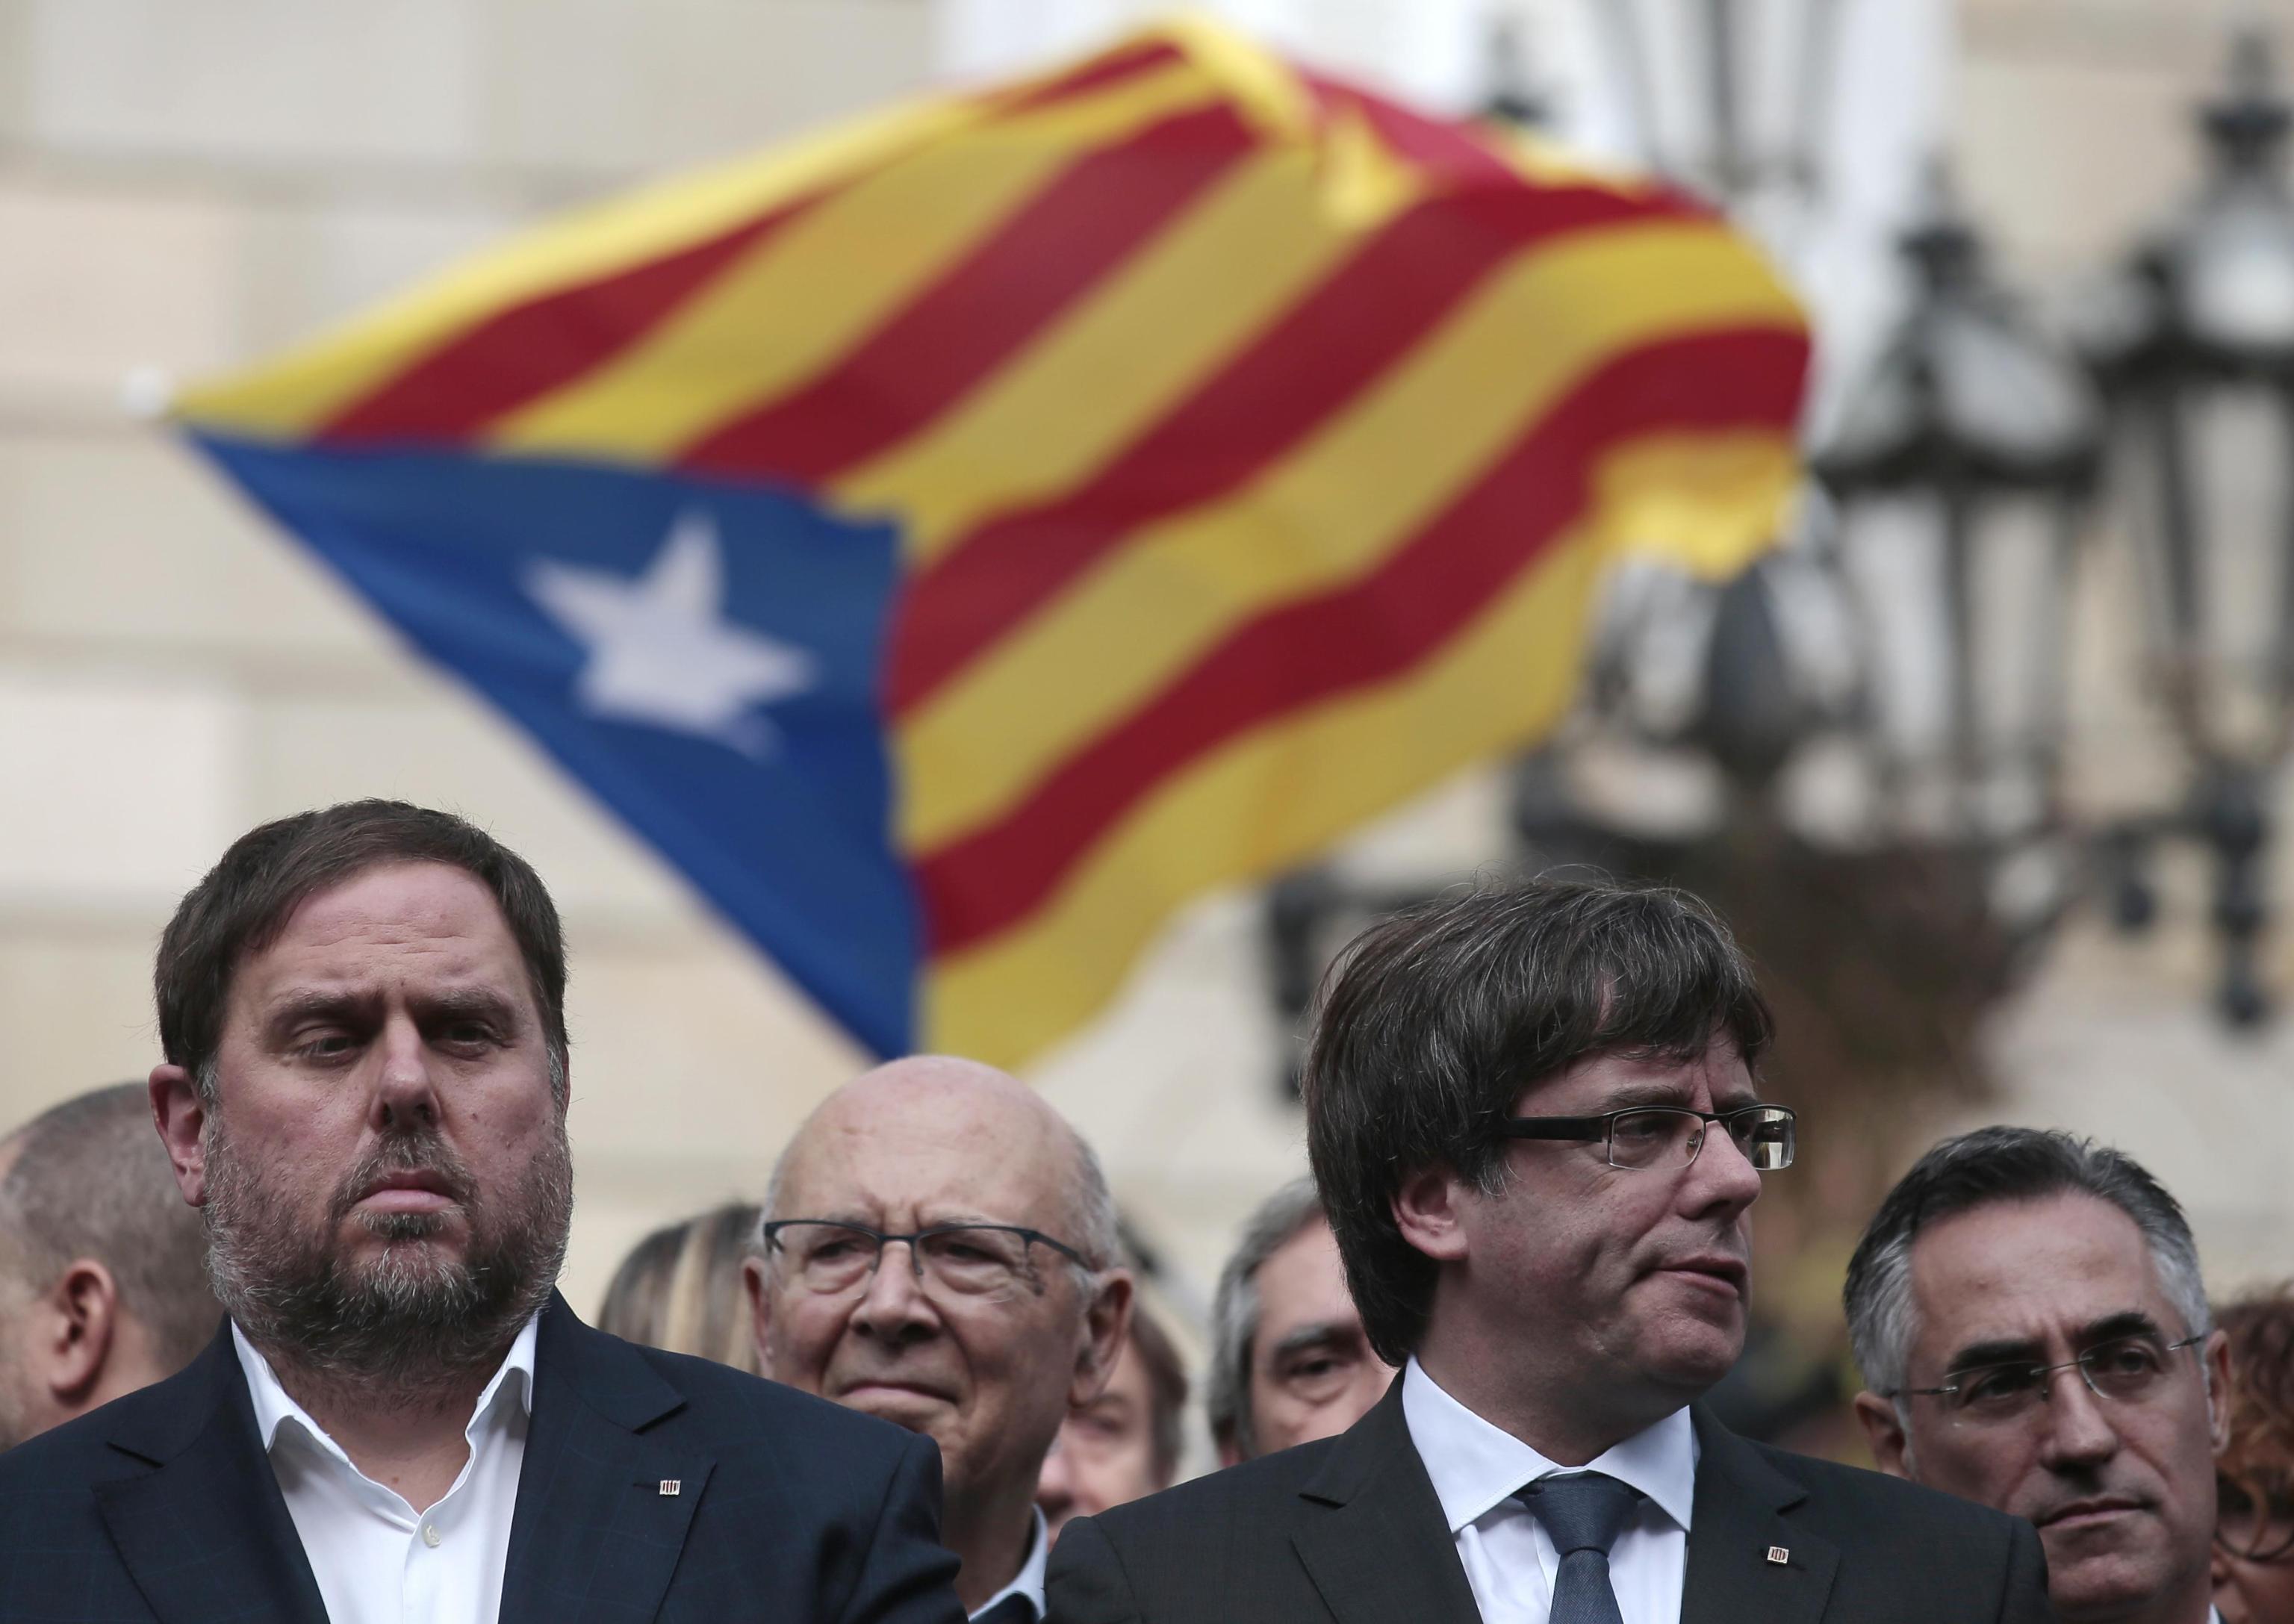 Catalan regional Vice-President, Oriol Junqueras, left, and Catalan President, Carles Puigdemont, attend during a protest called by pro-independence outside of the Palau Generalitat in Barcelona, Spain, Monday, Oct. 2, 2017. Catalonia's government will hold a closed-door Cabinet meeting Monday to discuss the next steps in its plan to declare independence from Spain following a disputed referendum marred by violence. (ANSA/AP Photo/Manu Fernandez) [CopyrightNotice: Copyright 2017 The Associated Press. All rights reserved.]